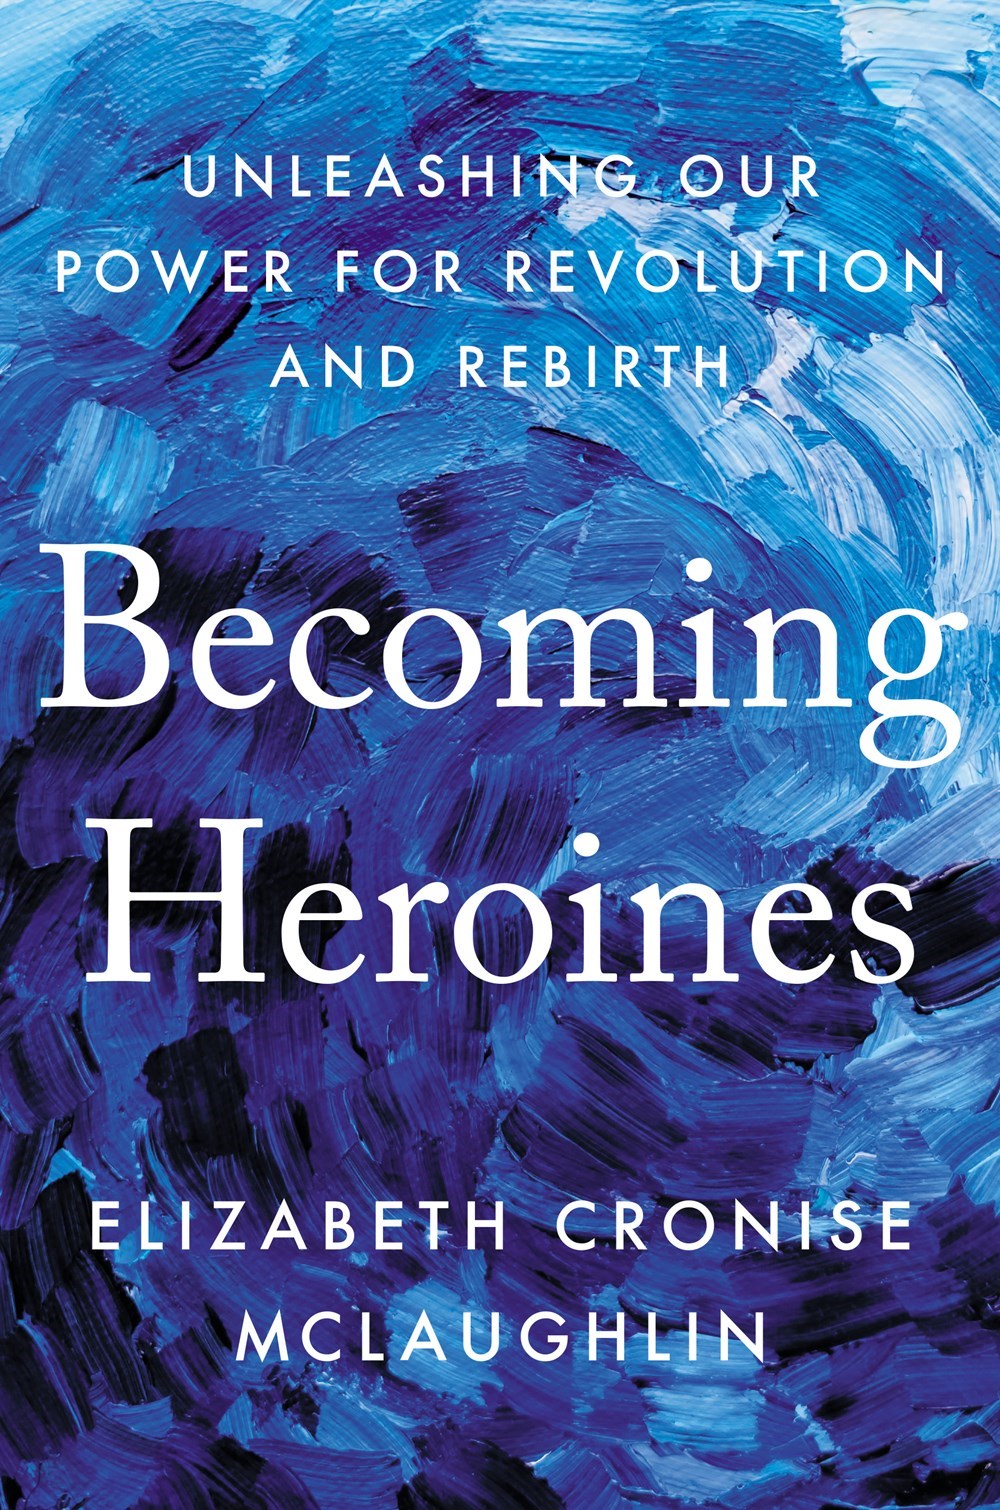 Becoming Heroines Unleashing Our Power for Revolution and Rebirth